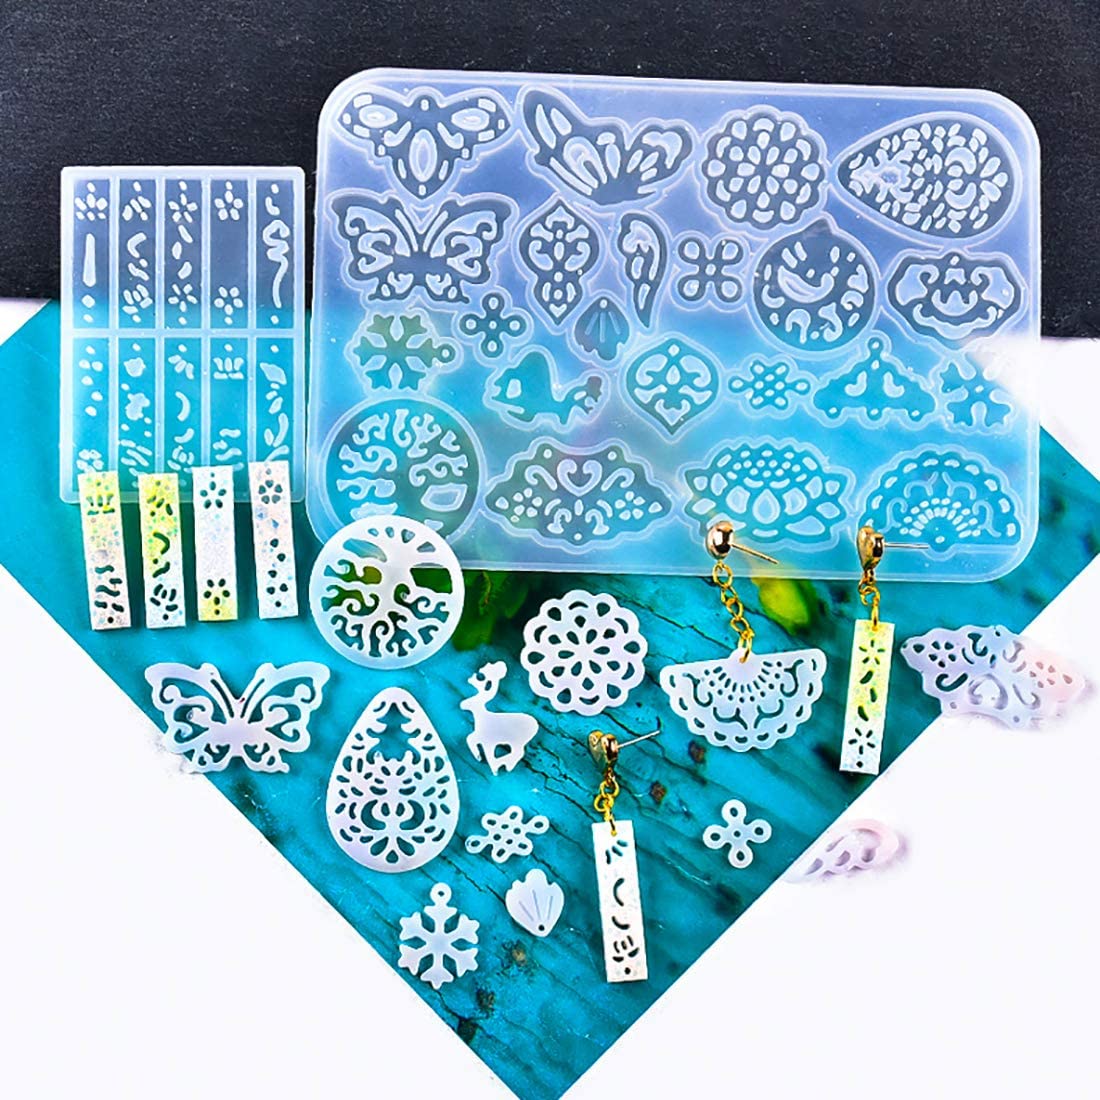 Resin Mold,Earring Mold Epoxy Pendant Molds Jewelry Molds Casting Silicone Molds Resin Leaf,Teardrop, Round, Heart Shaped, Snowflake Etc (Cute Earring Mold)